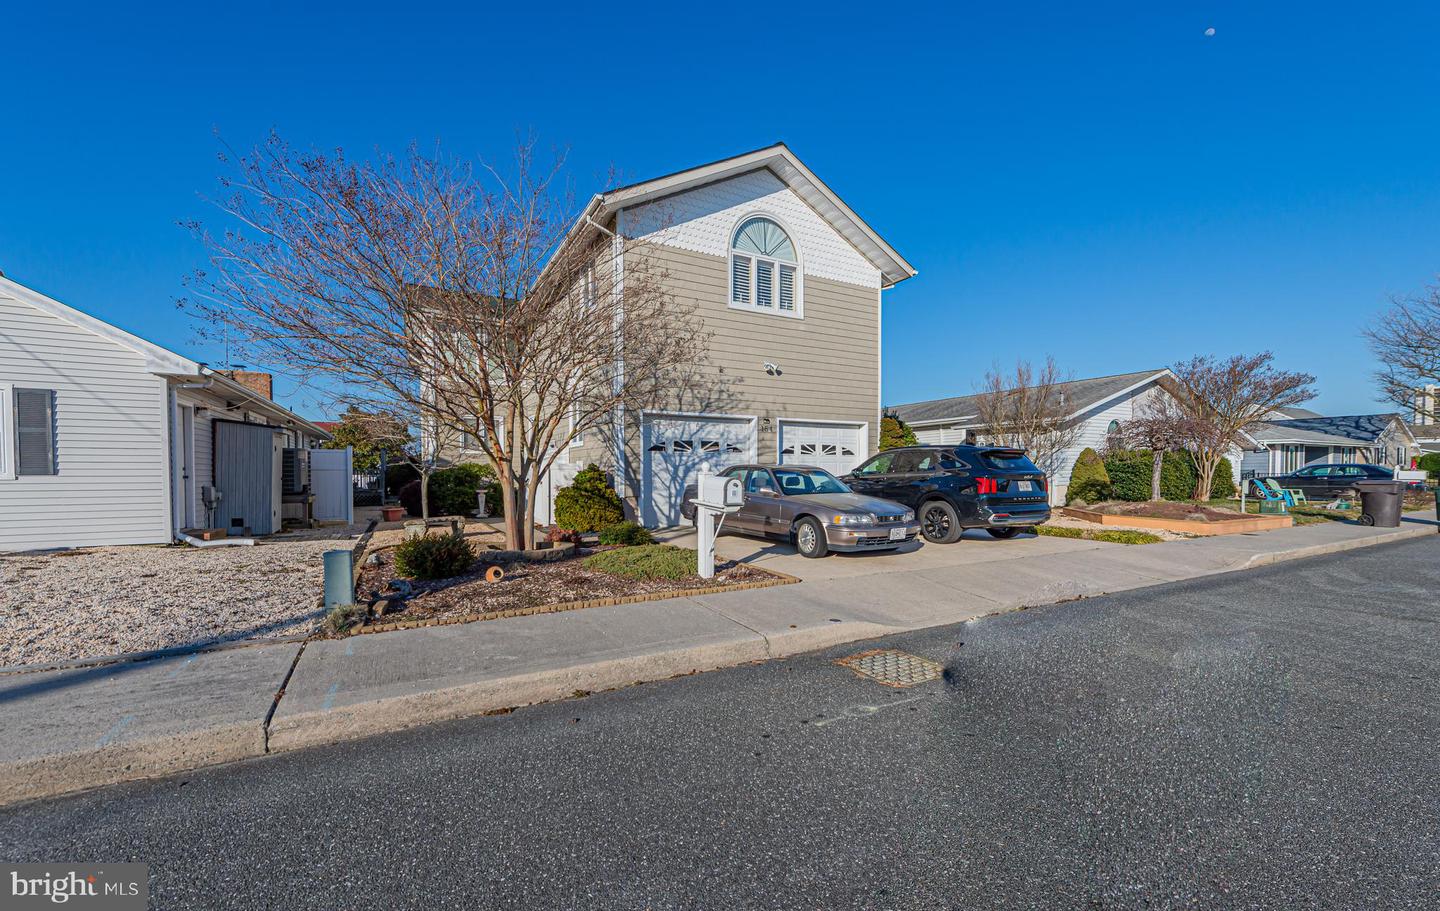 MDWO2019074-802877621452-2024-03-20-16-53-52 154 Old Wharf Rd | Ocean City, MD Real Estate For Sale | MLS# Mdwo2019074  - 1st Choice Properties